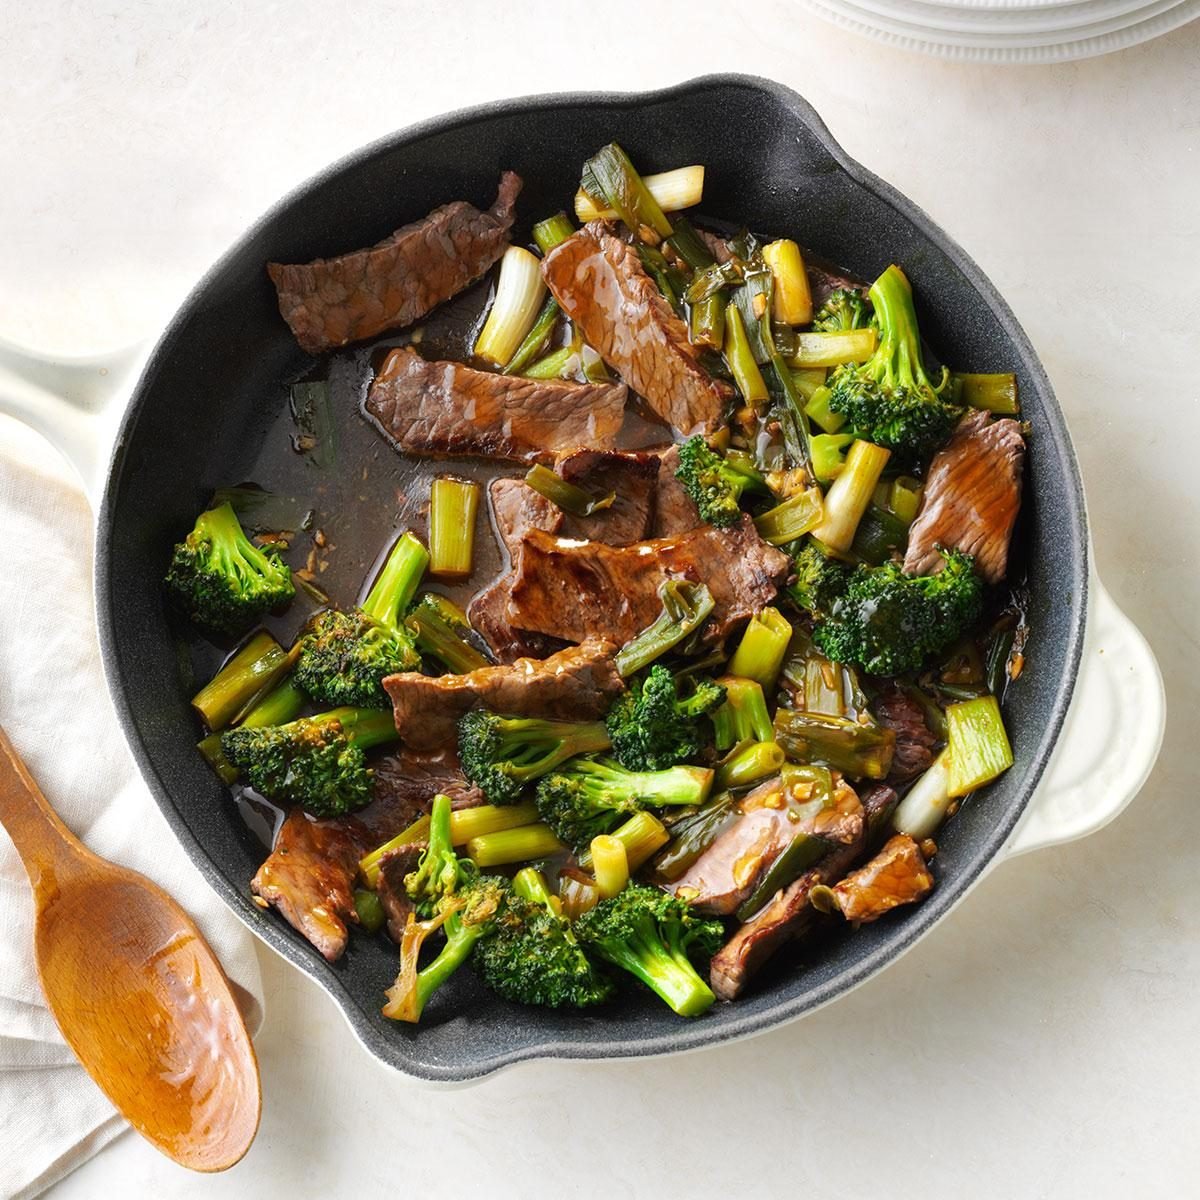 Day 18: Saucy Beef with Broccoli